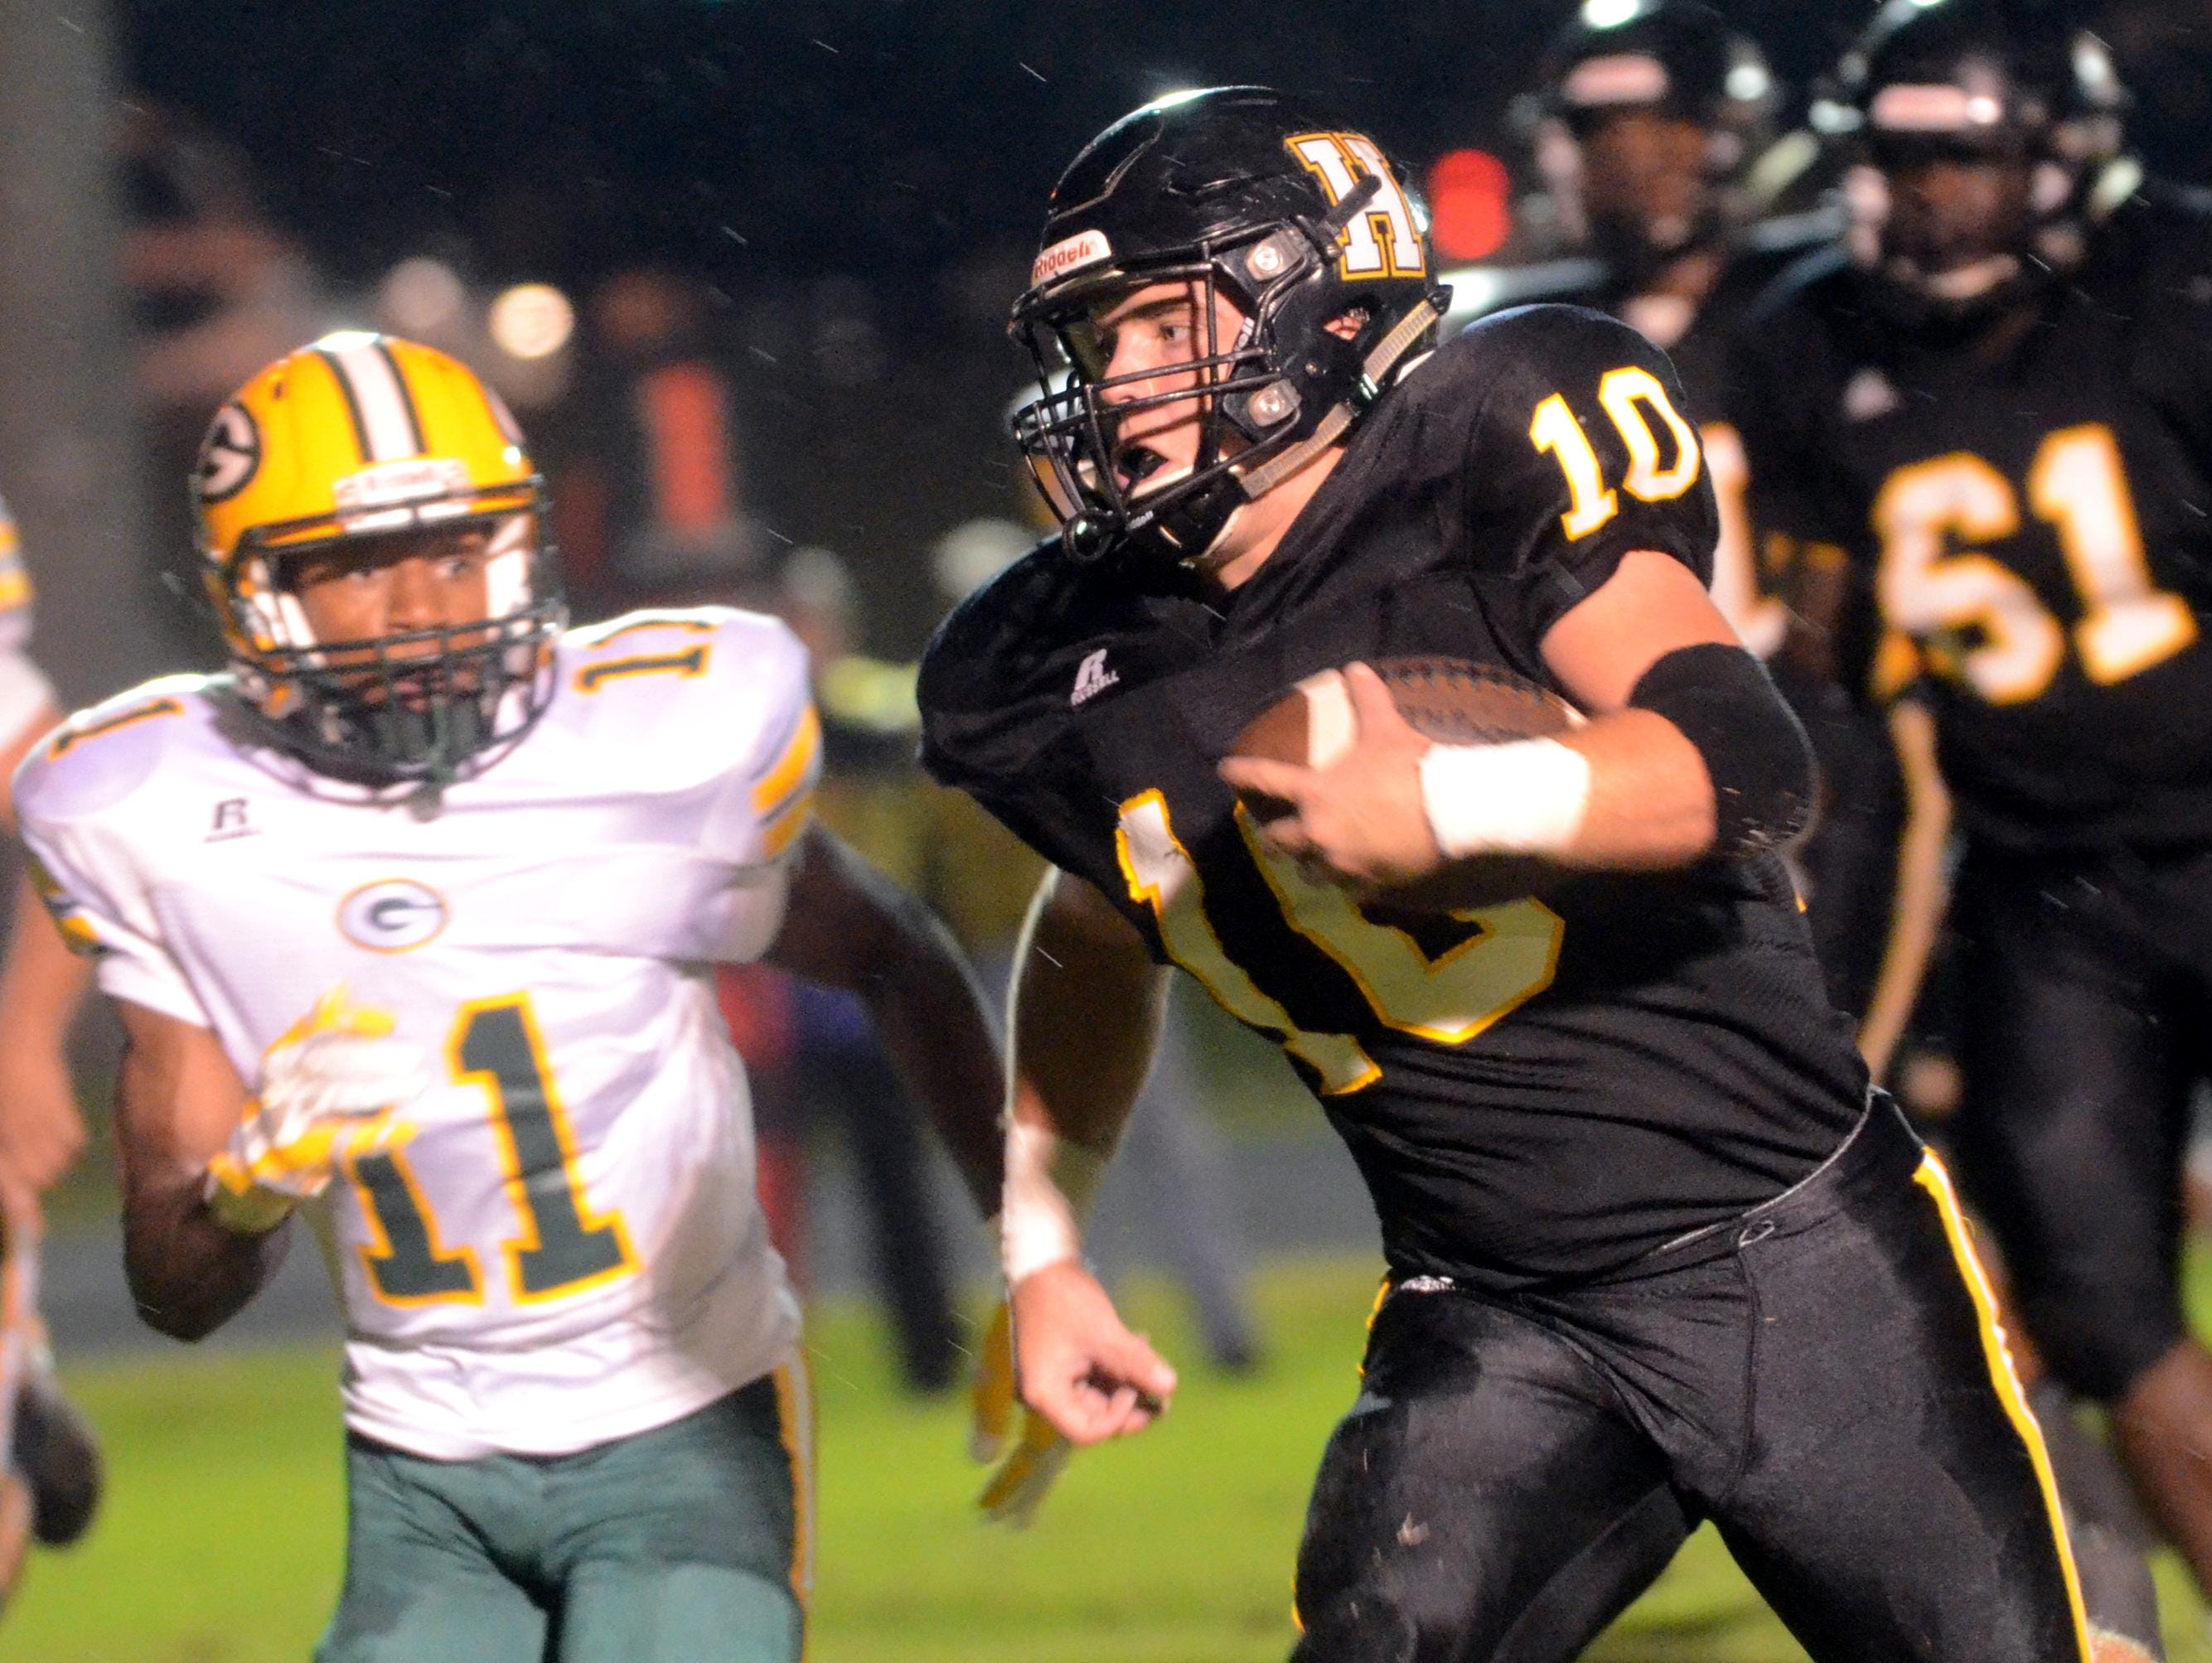 Hendersonville High senior Jack Towe carries the football to the end zone during a 14-yard touchdown run in the second quarter as Gallatin junior Dezmond Chambers pursues.